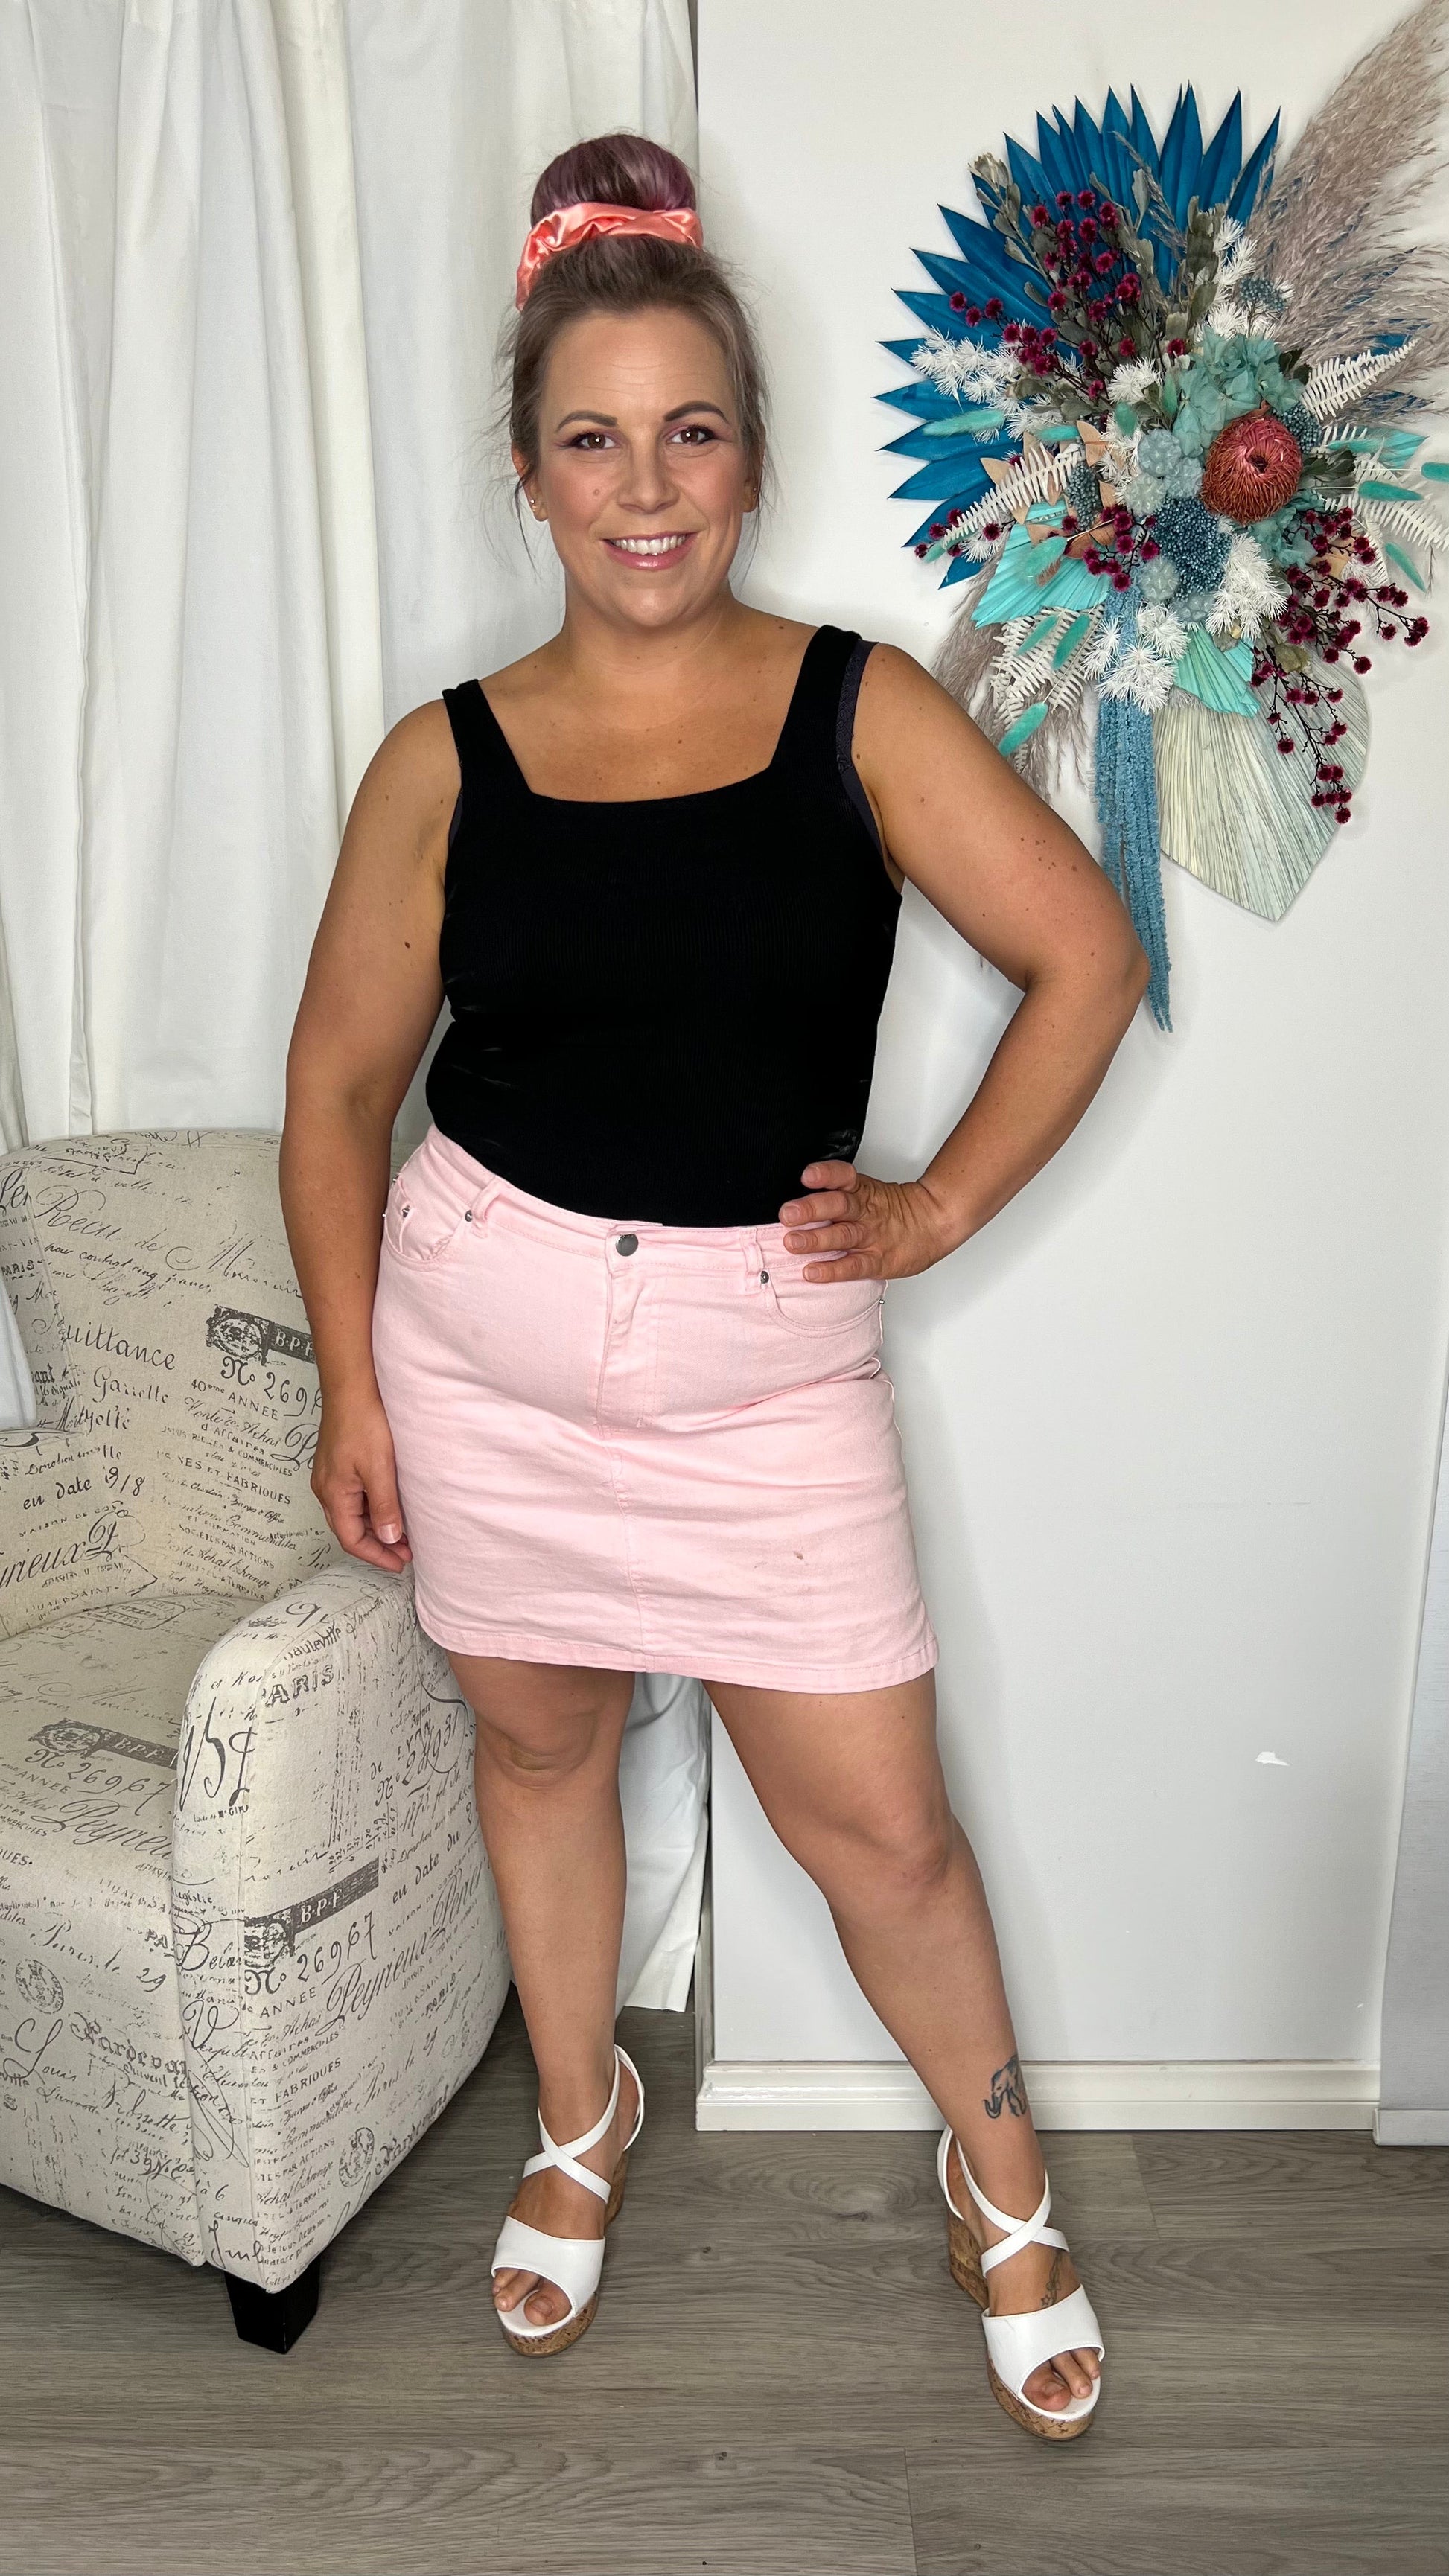 Demi Denim Skirt: Pastel perfection! A classic denim skirt is a must have all year round. Our Demi skirt sets the tone for Spring in a variety of fresh and fun washes with that hint o - Ciao Bella Dresses - Sass Clothing